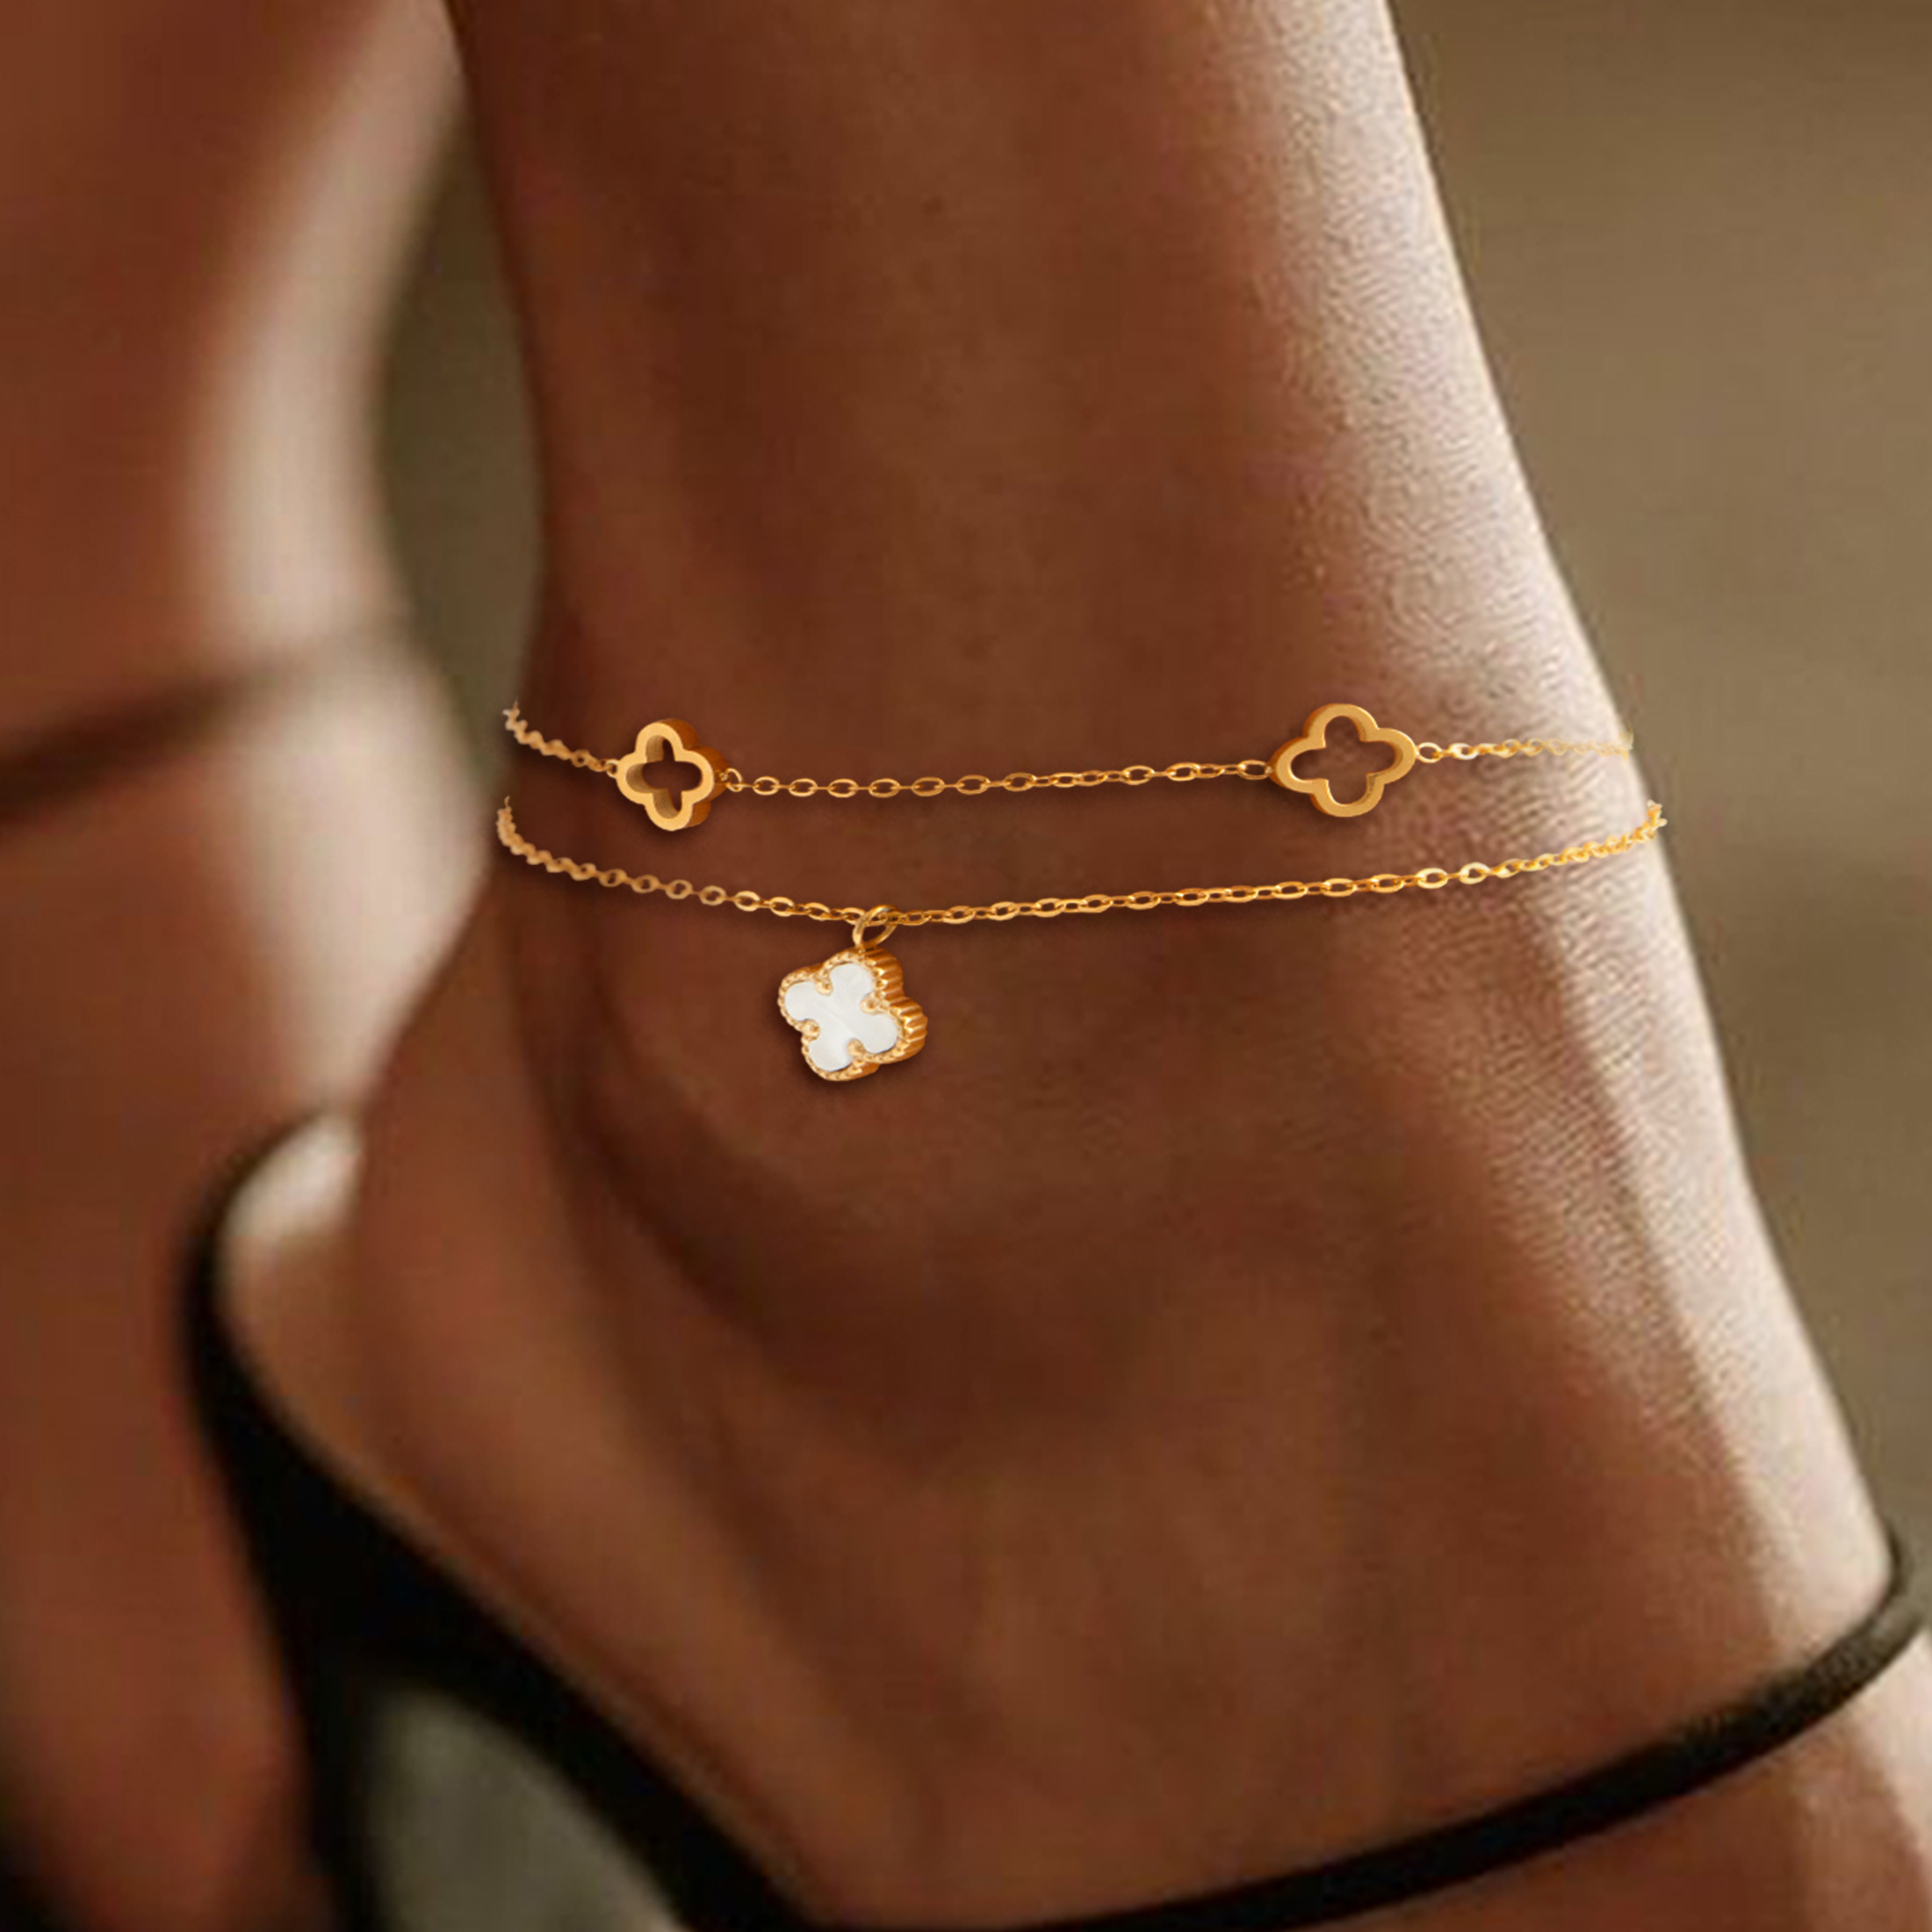 

Elegant Women's Anklet With Four-leaf Clover & Shell Pendant - Hypoallergenic Stainless Steel, Perfect For Vacation Wear